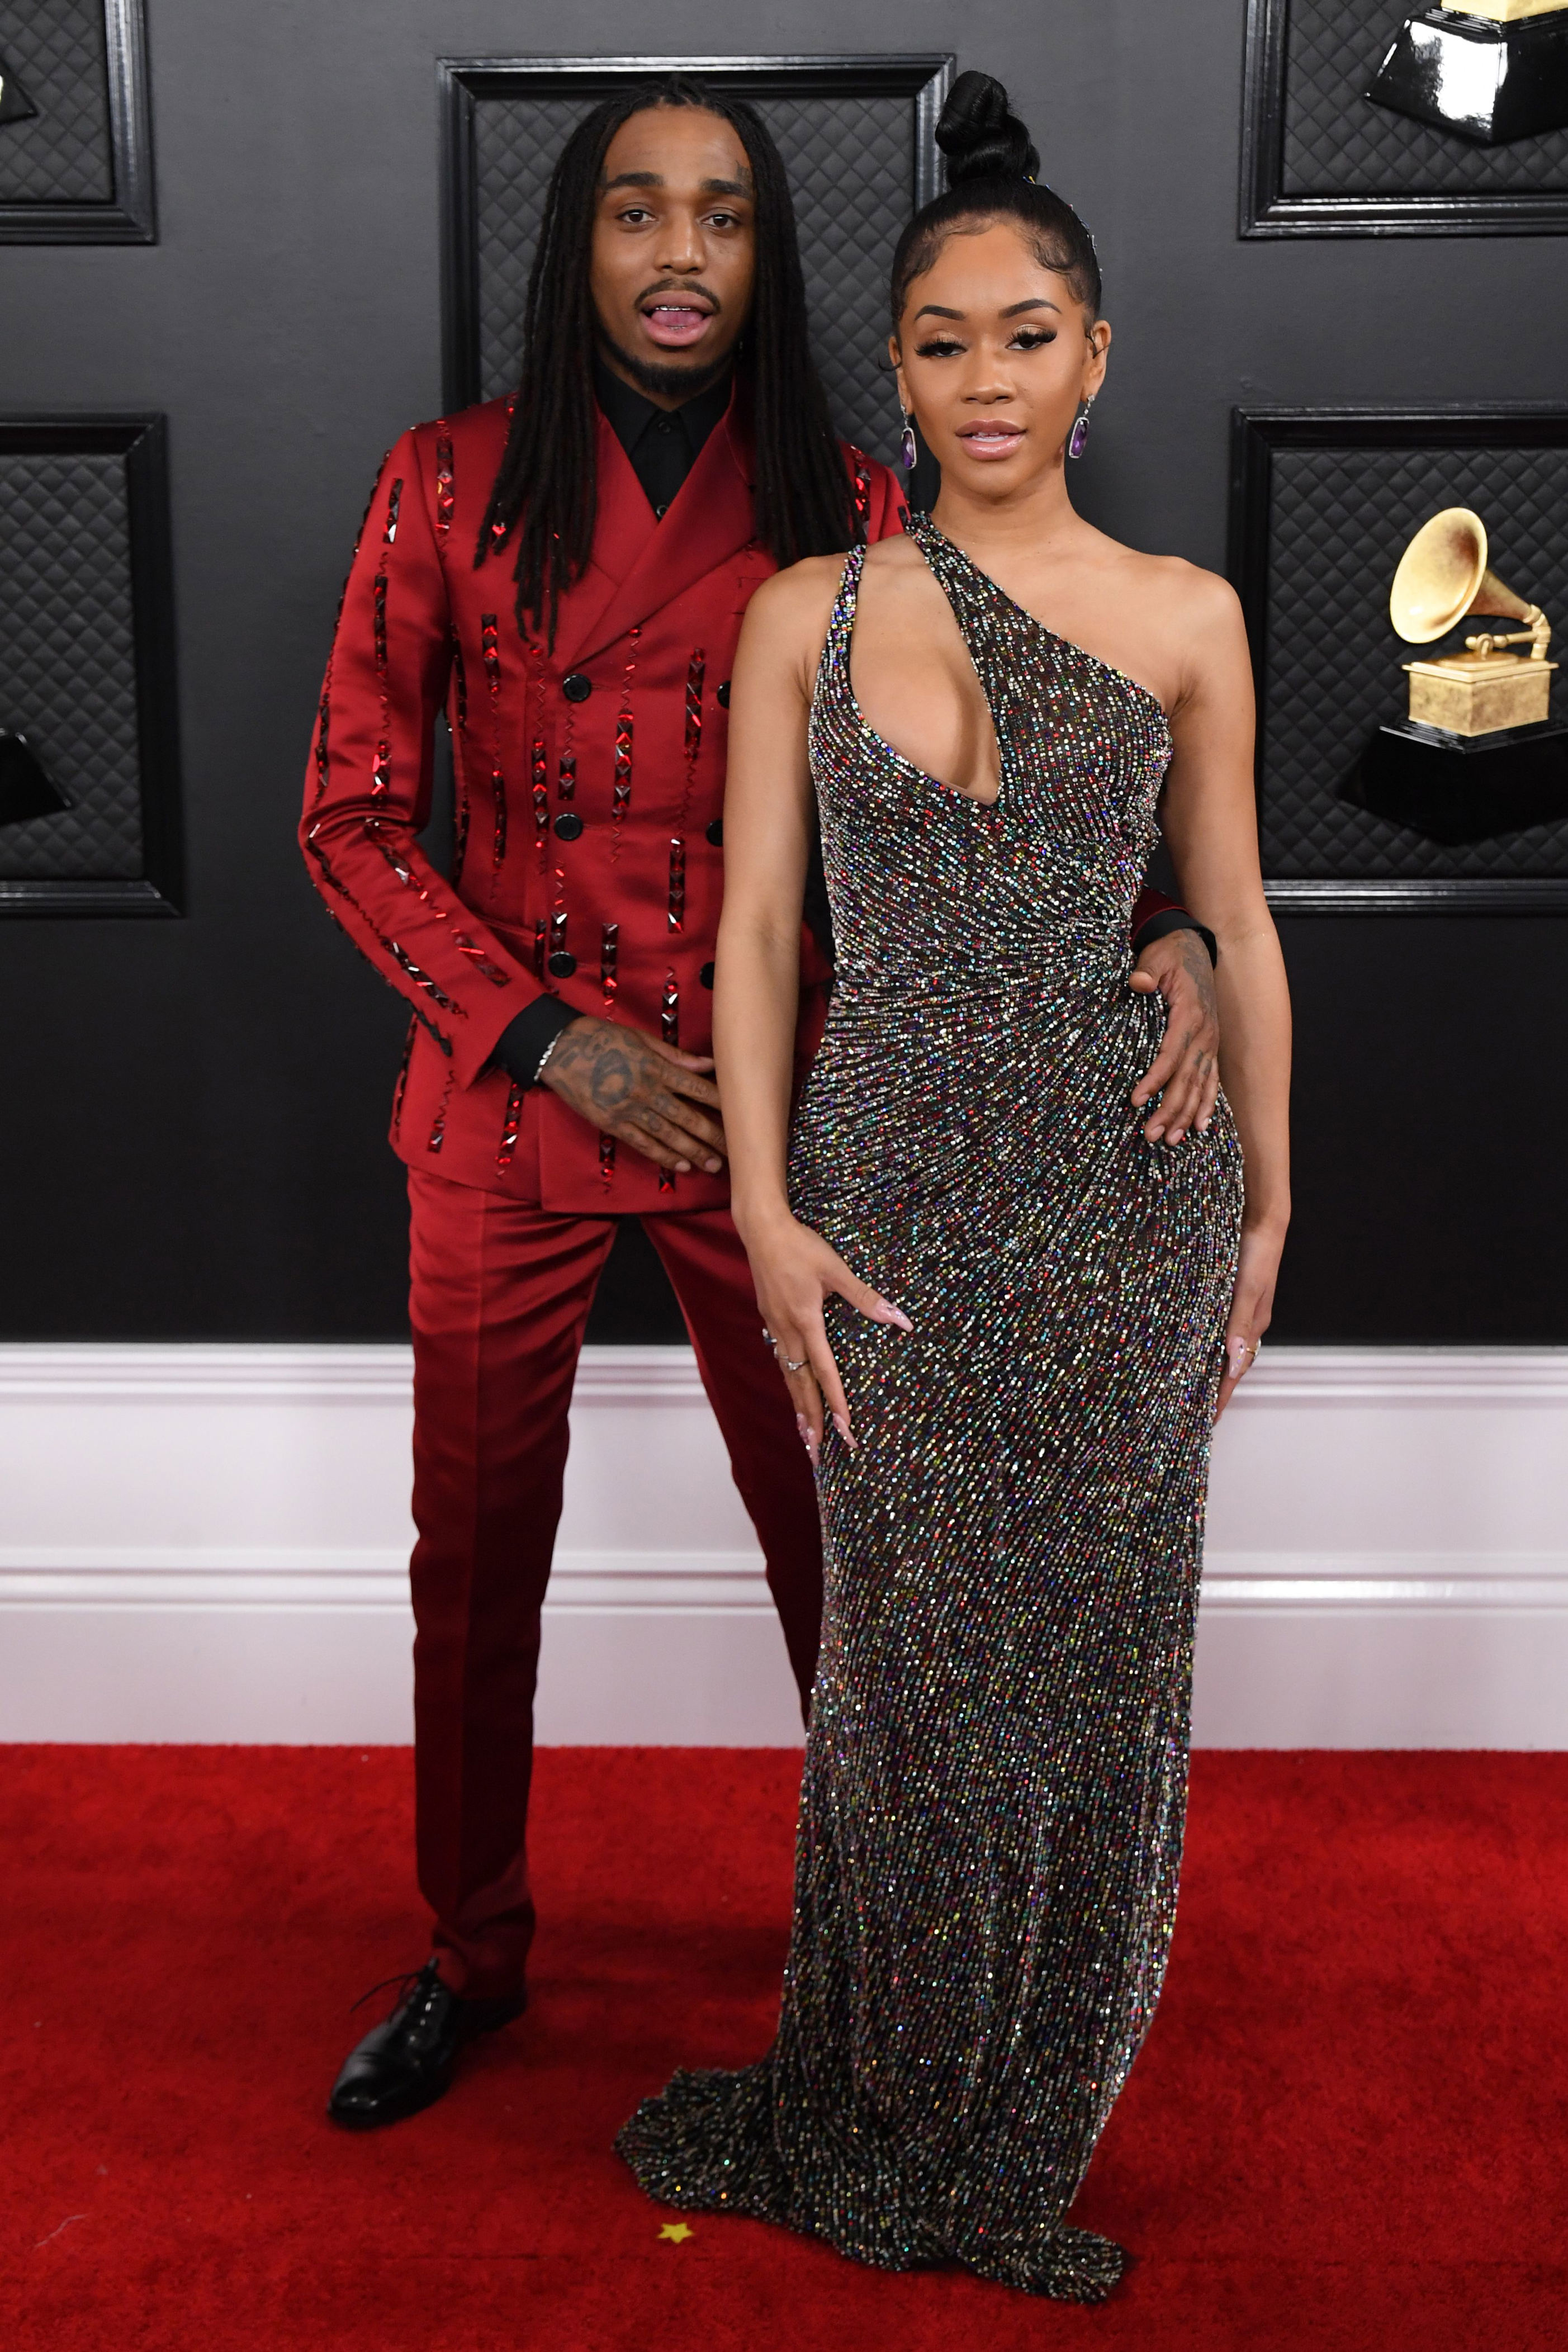 <p>During a joint interview with <a href="https://www.gq.com/story/quavo-saweetie-love-language">GQ</a> that debuted online in July 2020, Quavo and Saweetie dished on how they first connected on Instagram when the Migos rapper spotted her on his Explore page. He then researched the "Icy Grl" rapper before sliding into her DMs. "I told her, 'You an icy girl, you need a glacier boy,'" he recalled of his opening line. After chatting via direct messages, they graduated to phone calls. Months later, he invited her to a big party in Los Angeles. She then ghosted him. "I was trying to play hard to get," she revealed. They later had their first real date in Atlanta. After he choked on a crab cake at a fancy restaurant, he gave her a tour of the Quality Control Music studios. They then headed to a strip club, where a fight broke out. During the ensuing fray, Quavo and Saweetie got separated. He raced back to the car ... and momentarily forgot he was on a date. "She catches up and cussed me out in front of [the club]," he said, adding that they ultimately smoothed things over. They dated for more than two years before breaking up in 2021.</p>